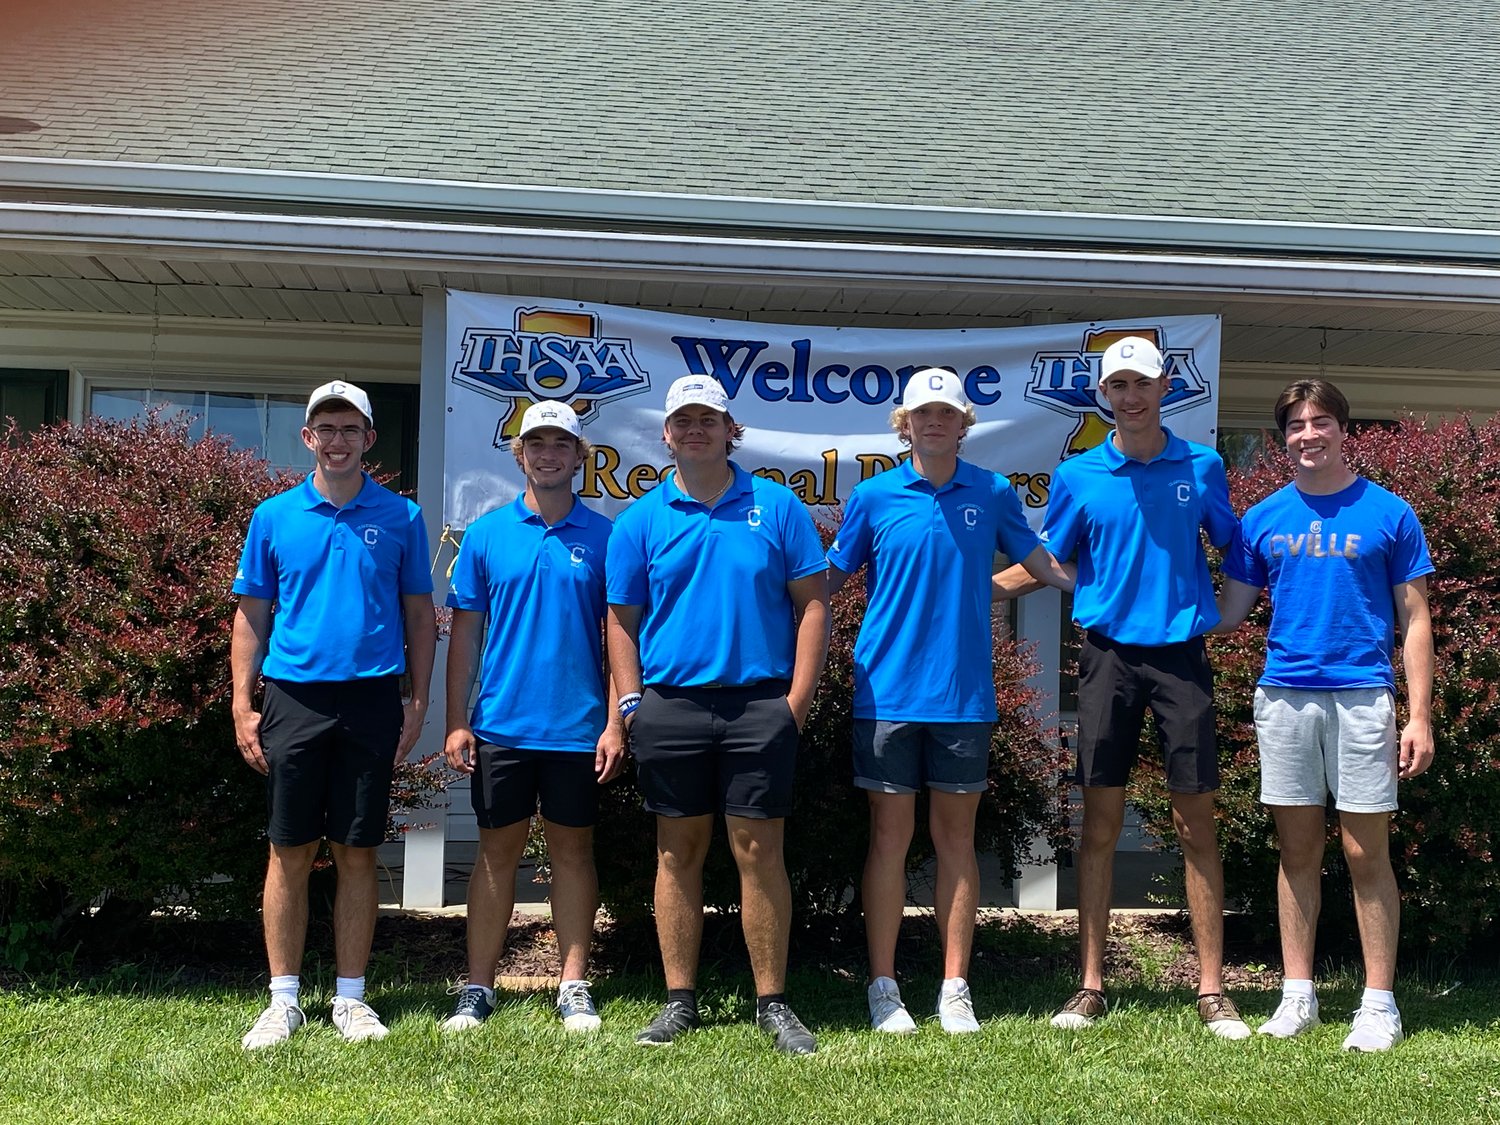 The Crawfordsville Athenians saved their season best performance for their final meet of the season as they shot a 342 at the Washington Regional